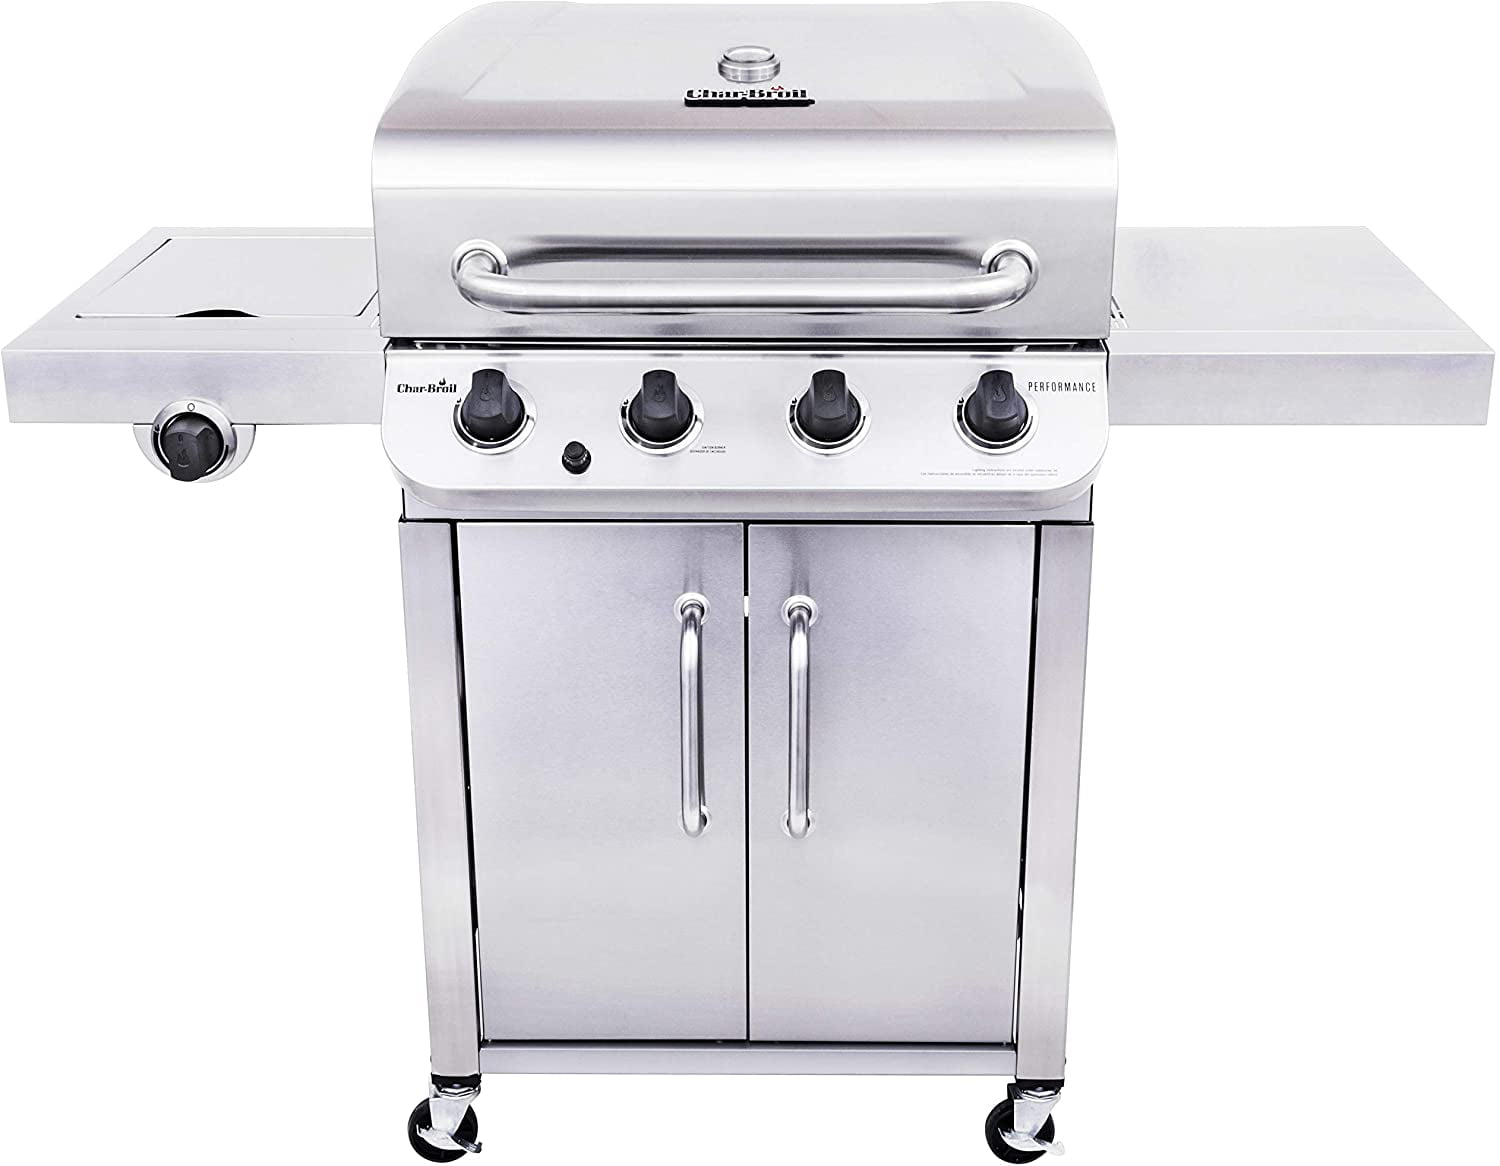 Char Broil 463375919 Performance Stainless Steel 4 Burner Cabinet Style Liquid Propane Gas Grill Walmart Com